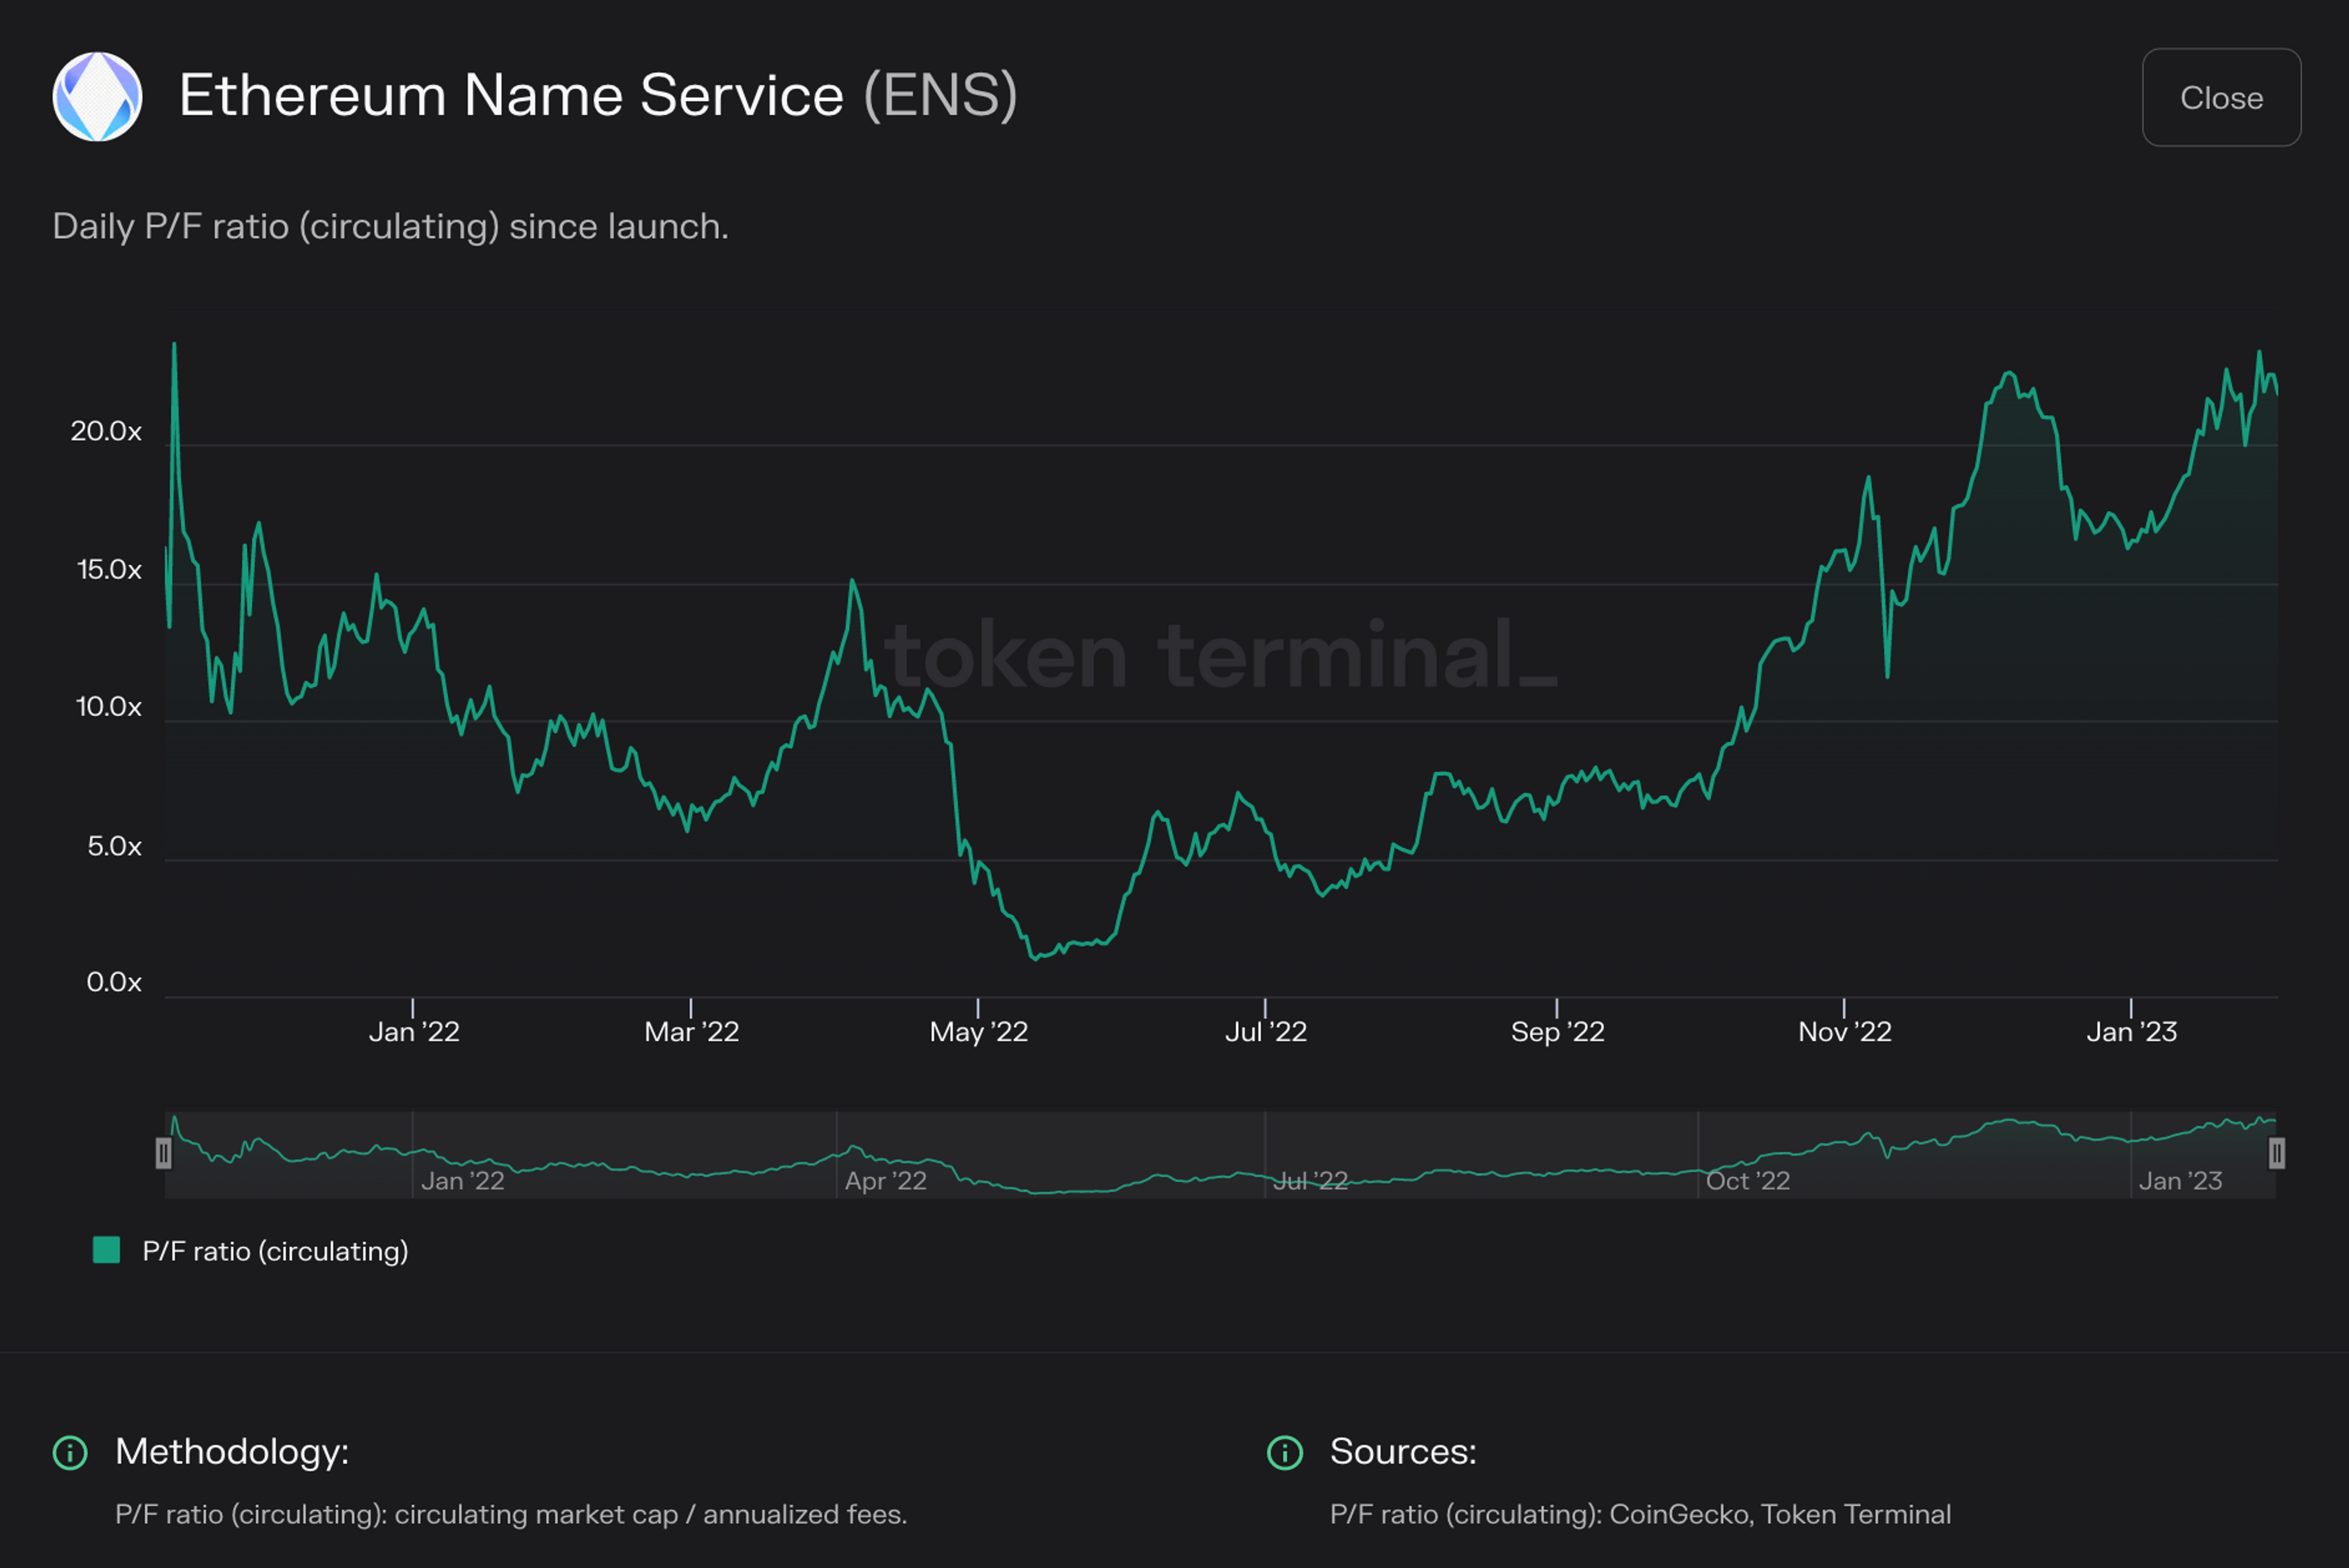 Chart of Ethereum Name Service daily P/F ratio